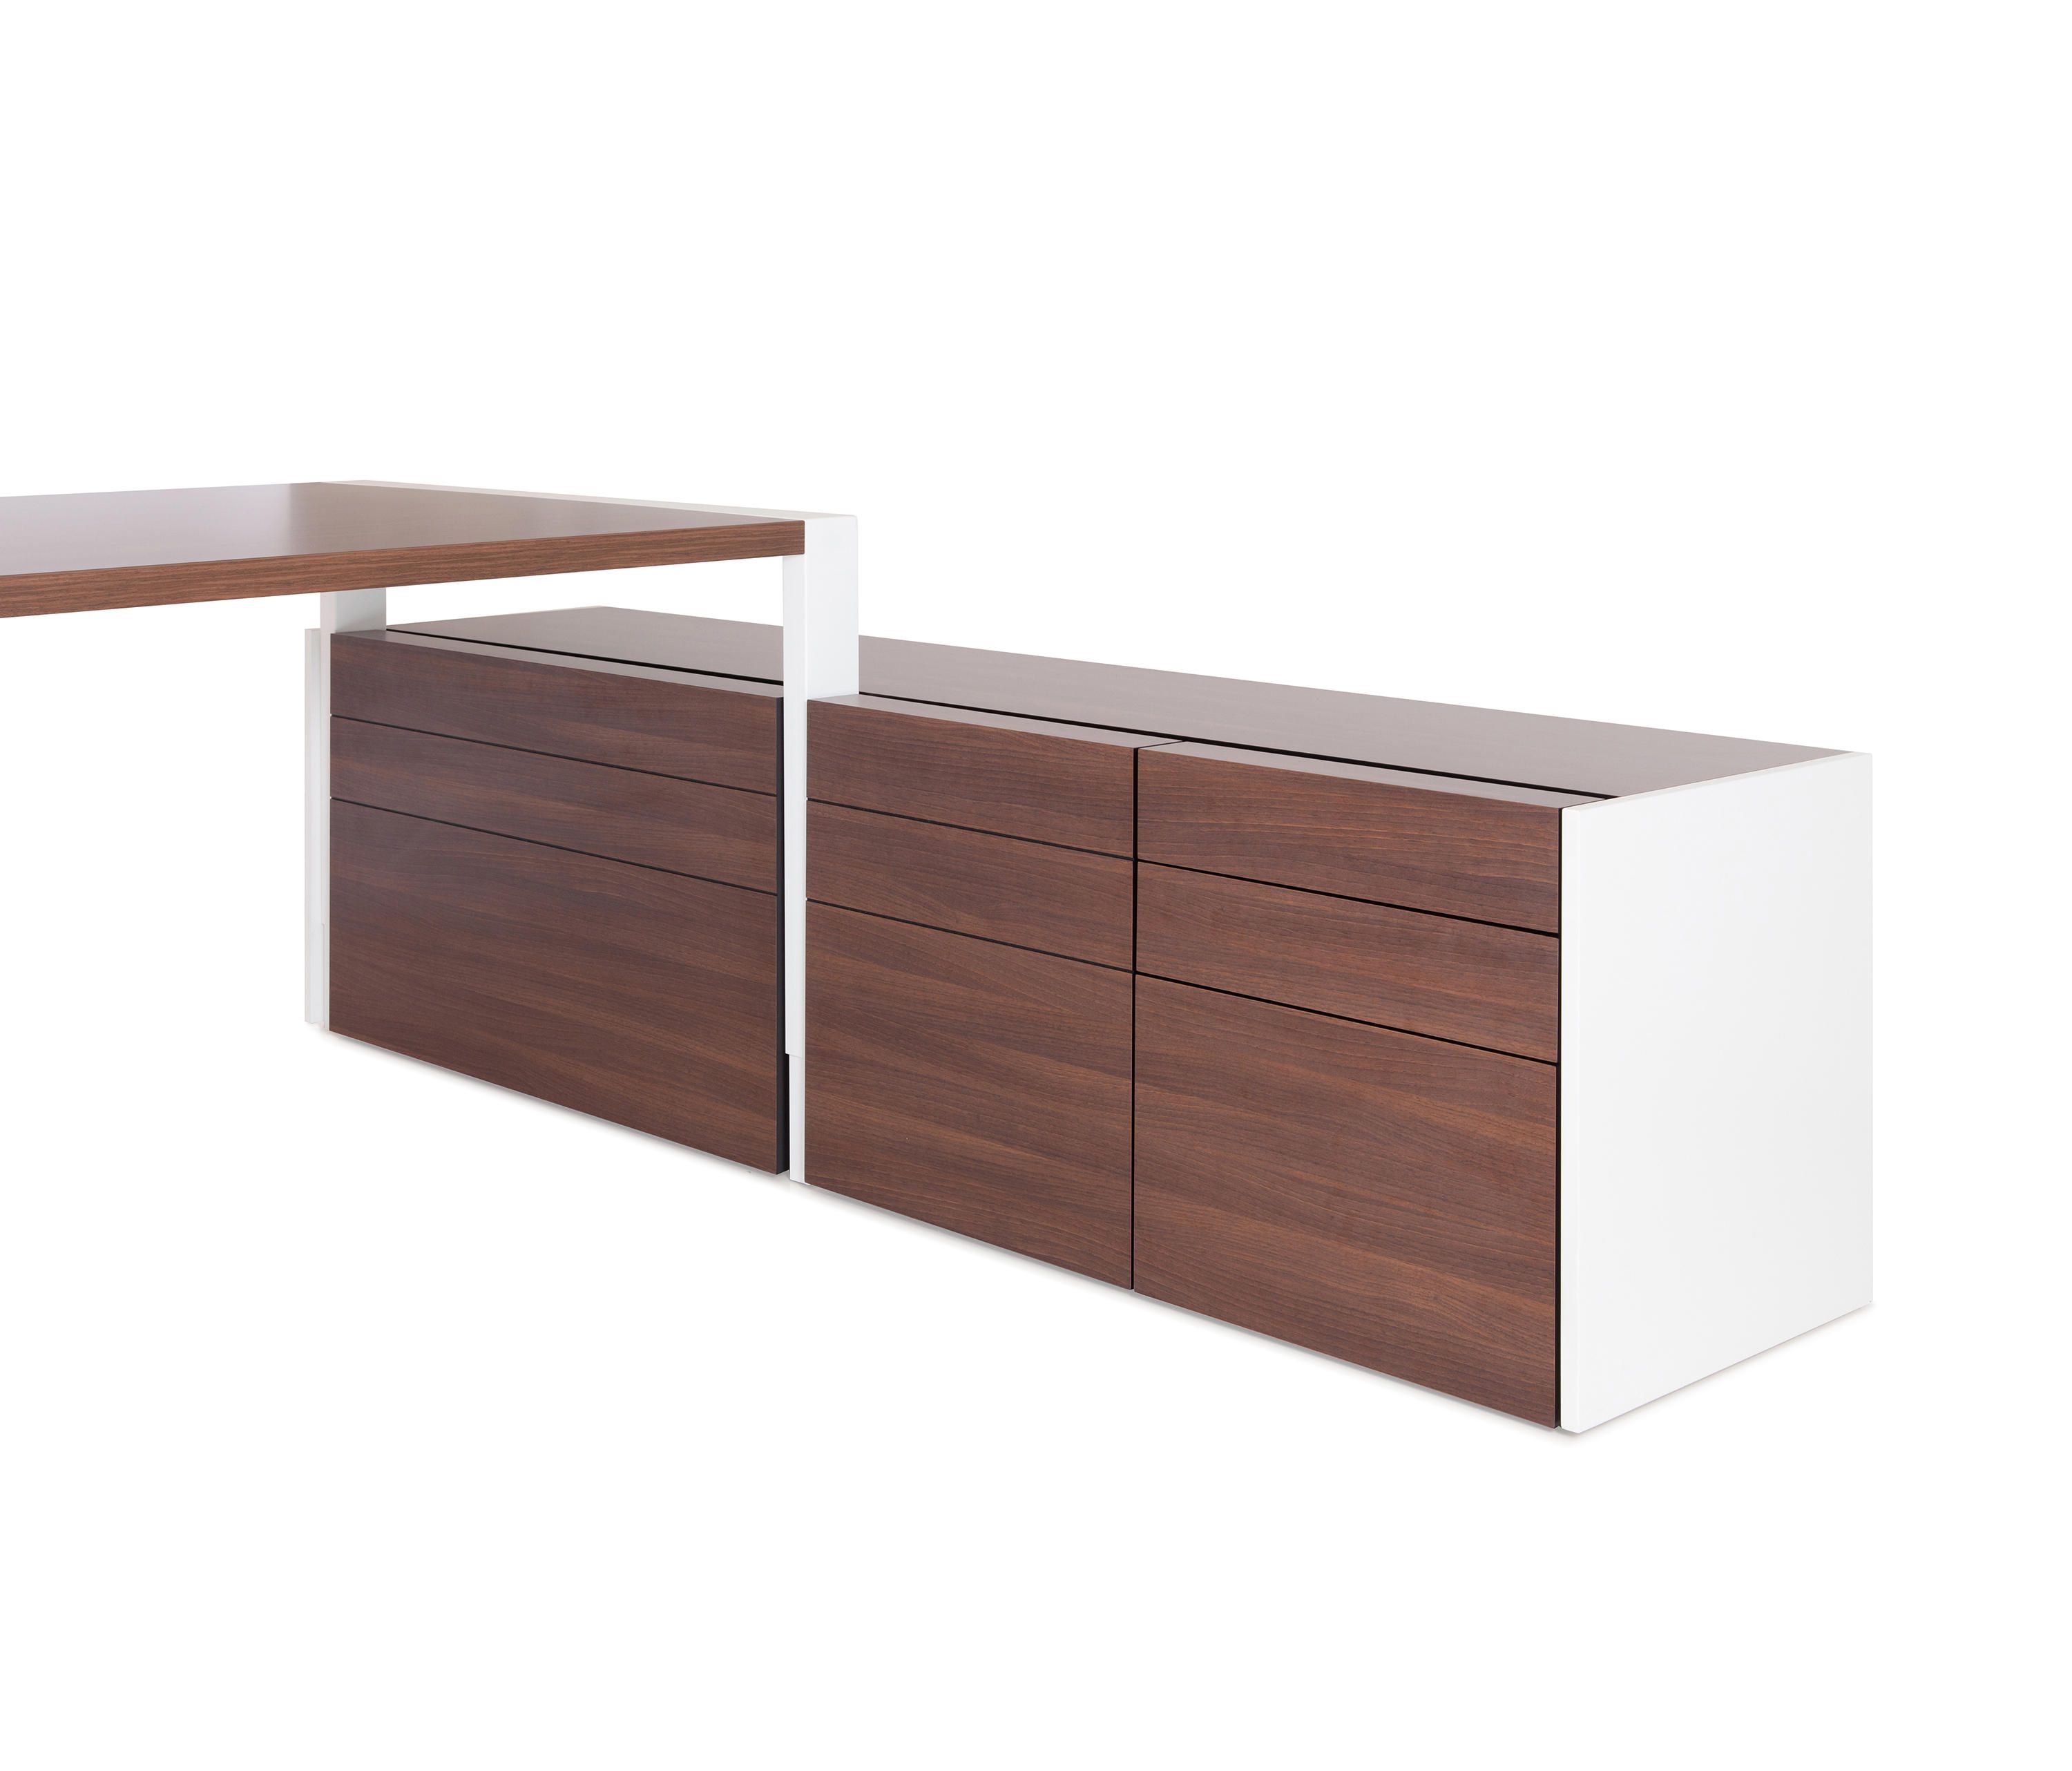 Sideboard – Sideboards / Kommoden Von Ahrend | Architonic Throughout Tate Sideboards (View 16 of 30)